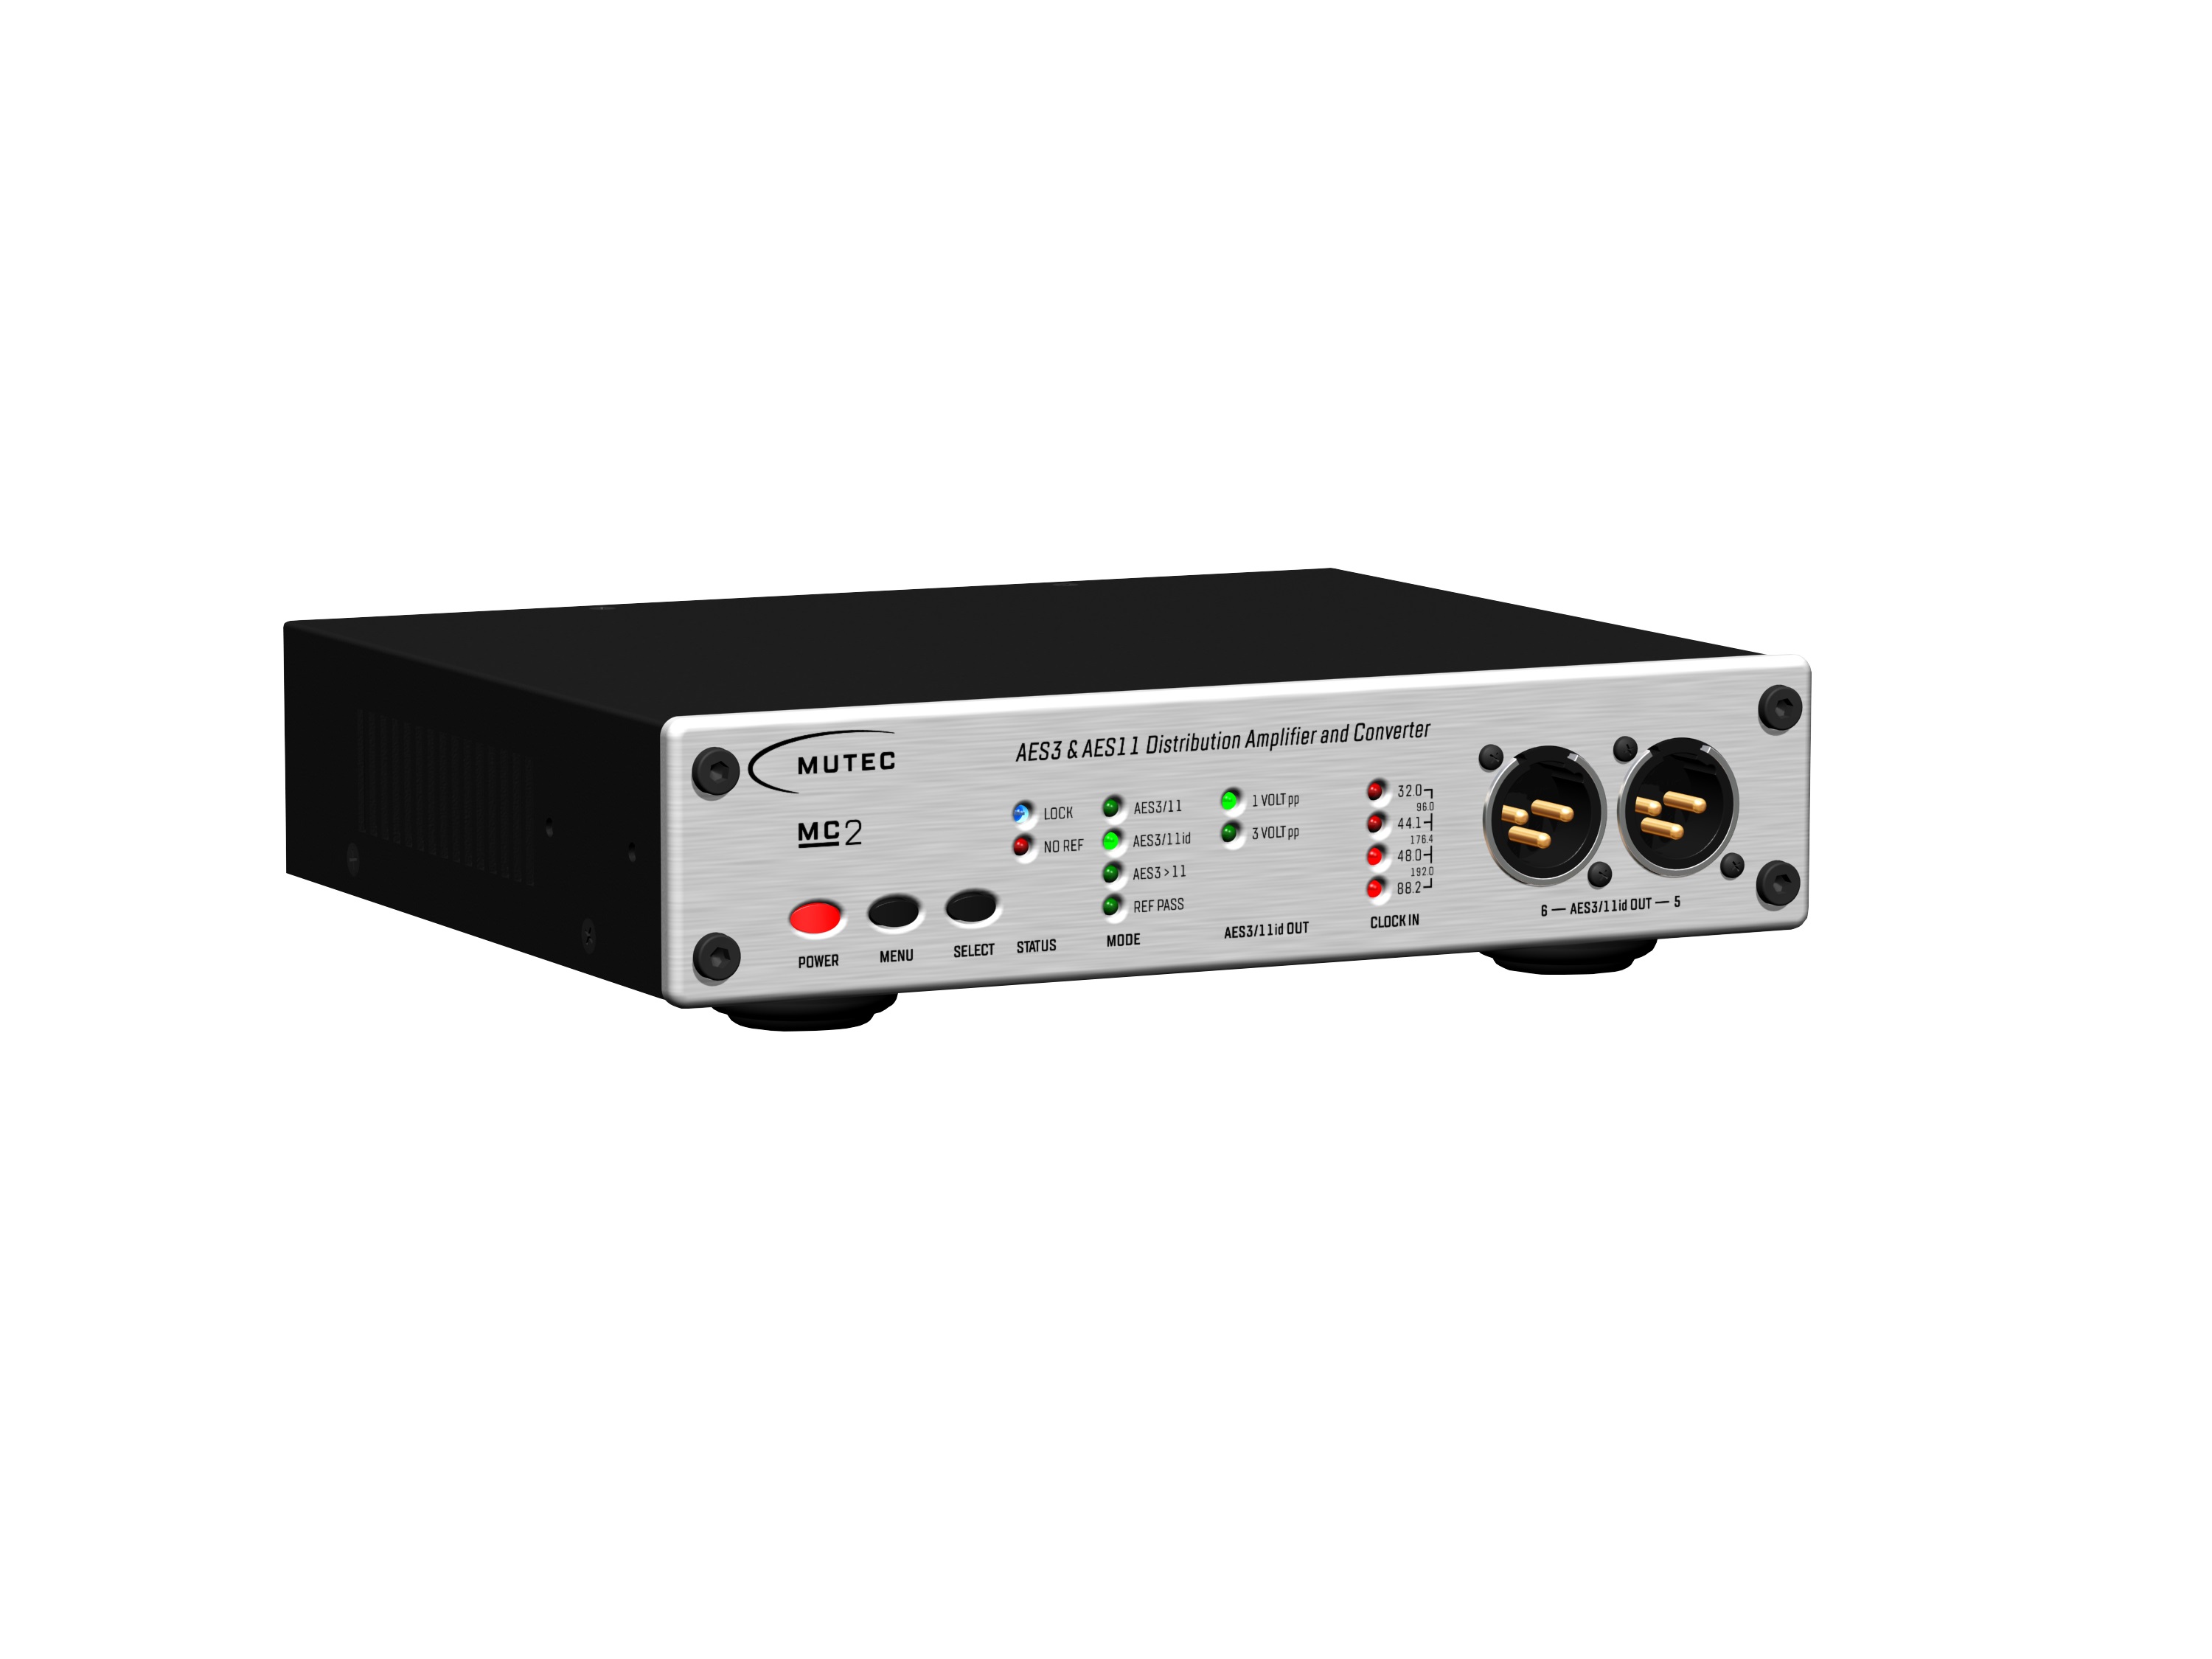 Mutec MC2 Distribution Amplifier and Format Converter for AES/EBU and AES/EBU ID